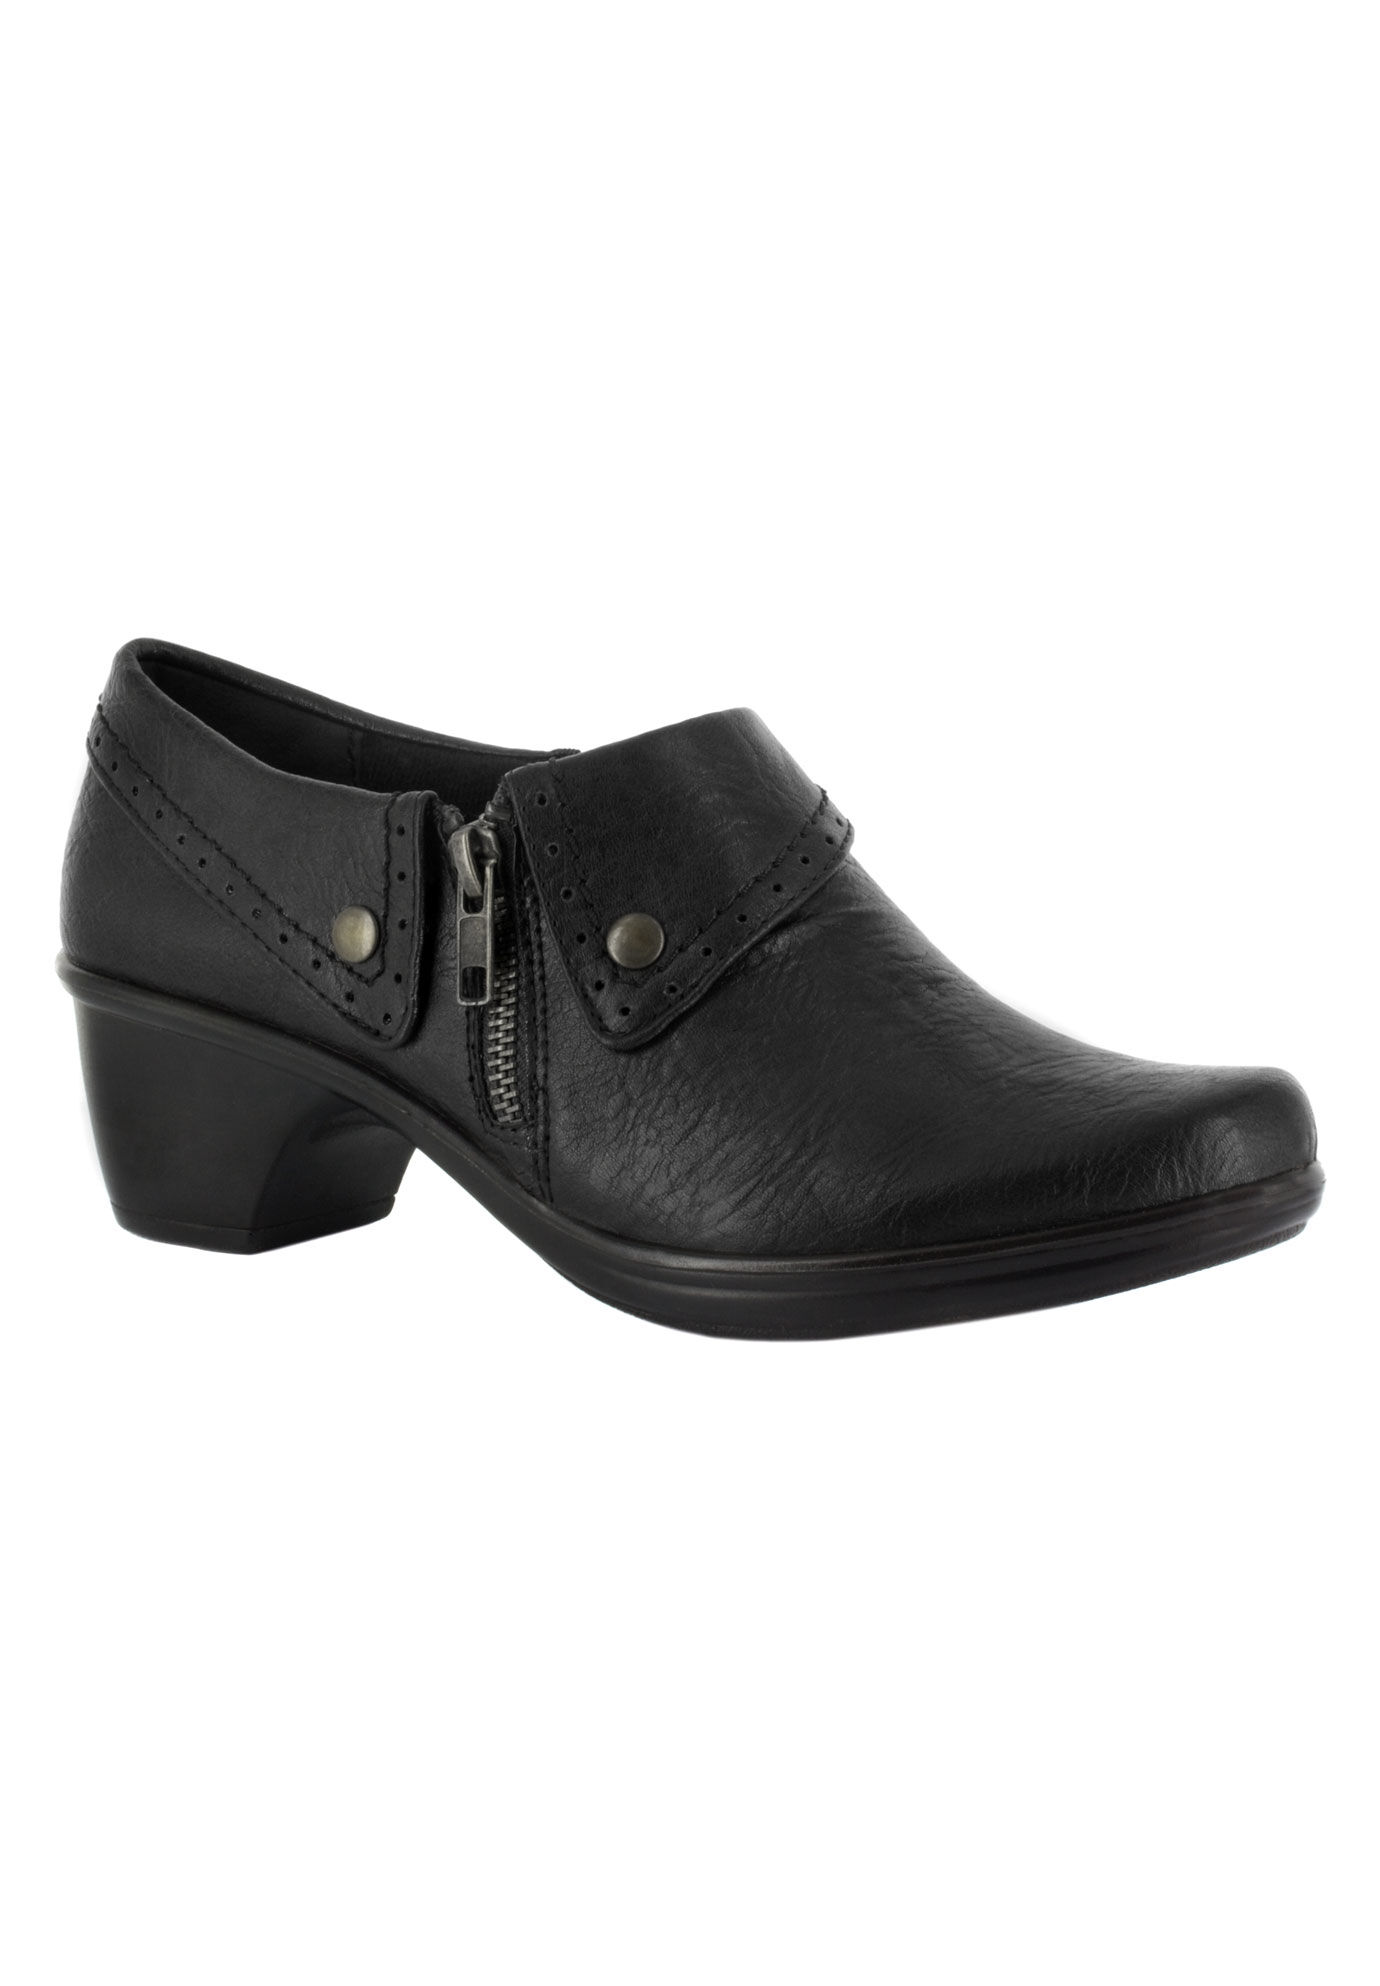 Wide Width Women's Shoes, Sandals & Boots by Easy Street | Woman